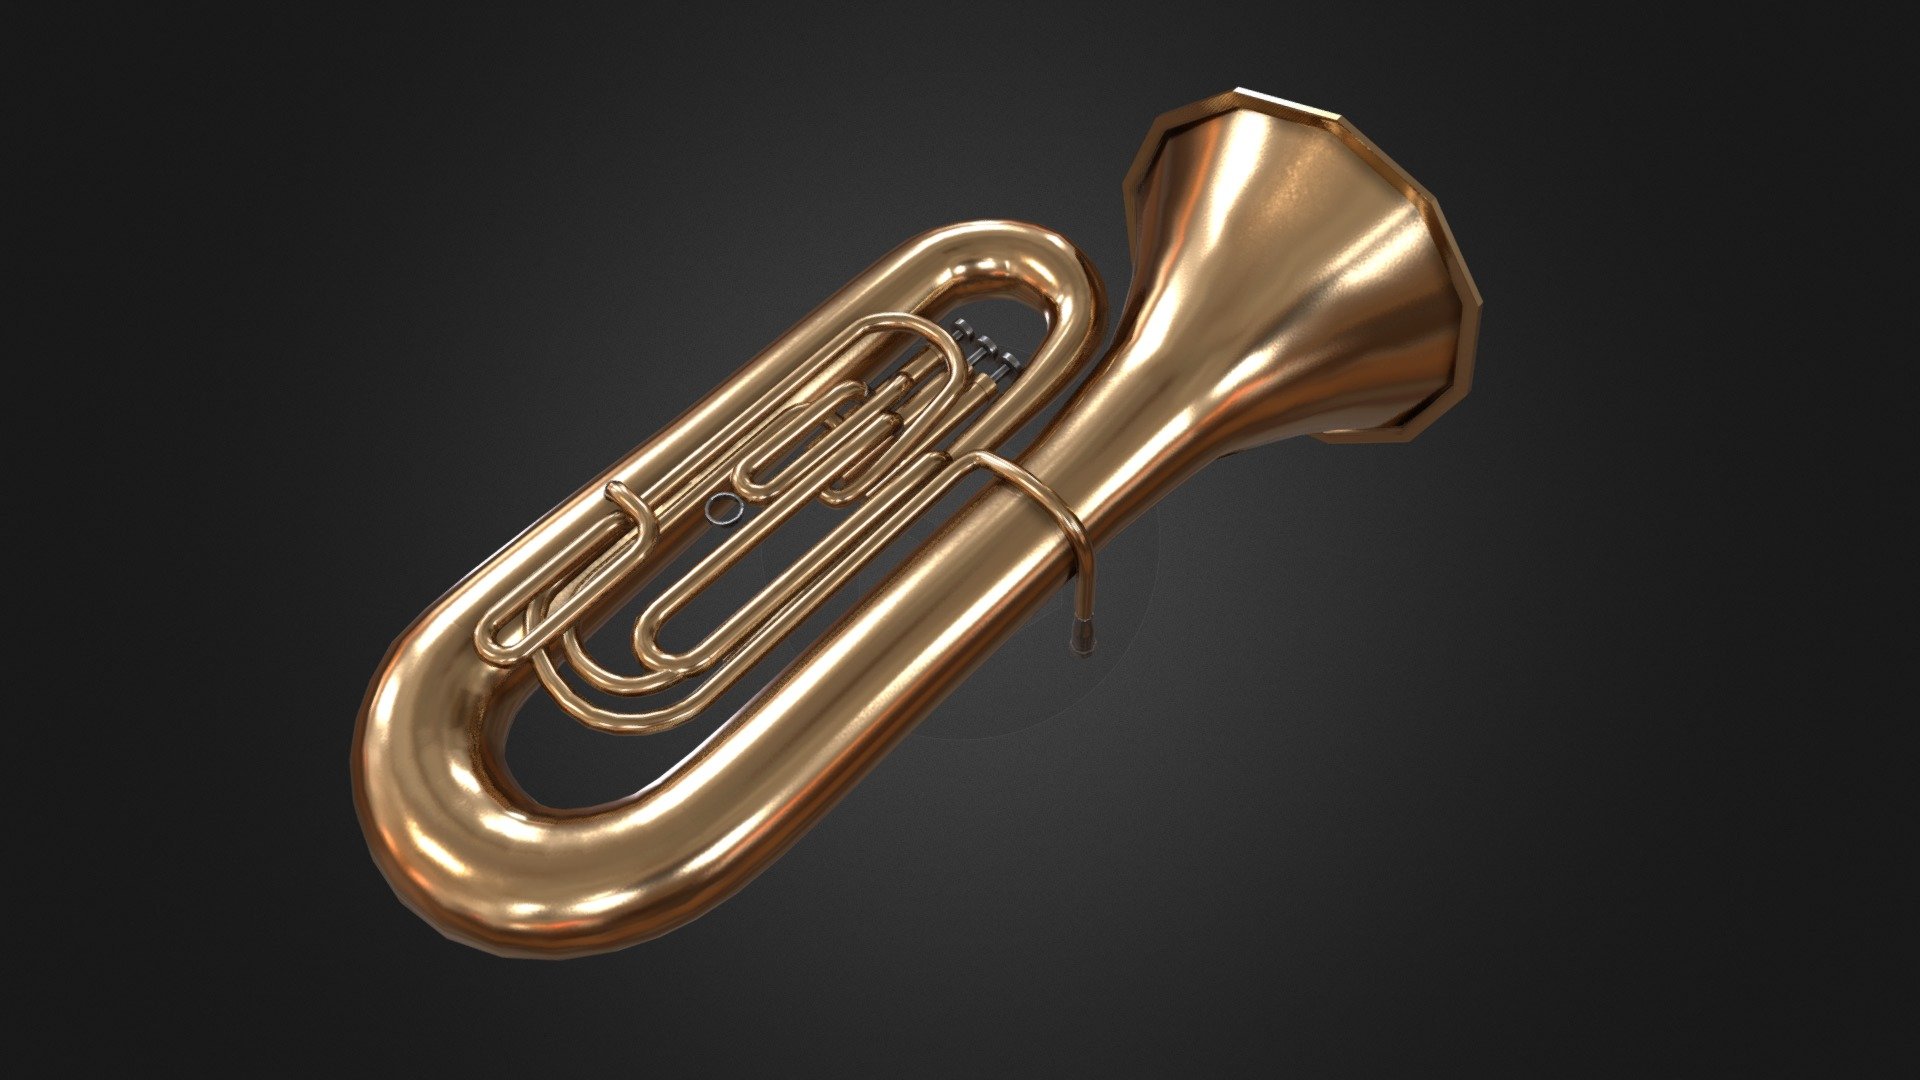 tuba made by blender textured by substance painter - Tuba - Buy Royalty Free 3D model by FLYRICE (@superrice1983) 3d model